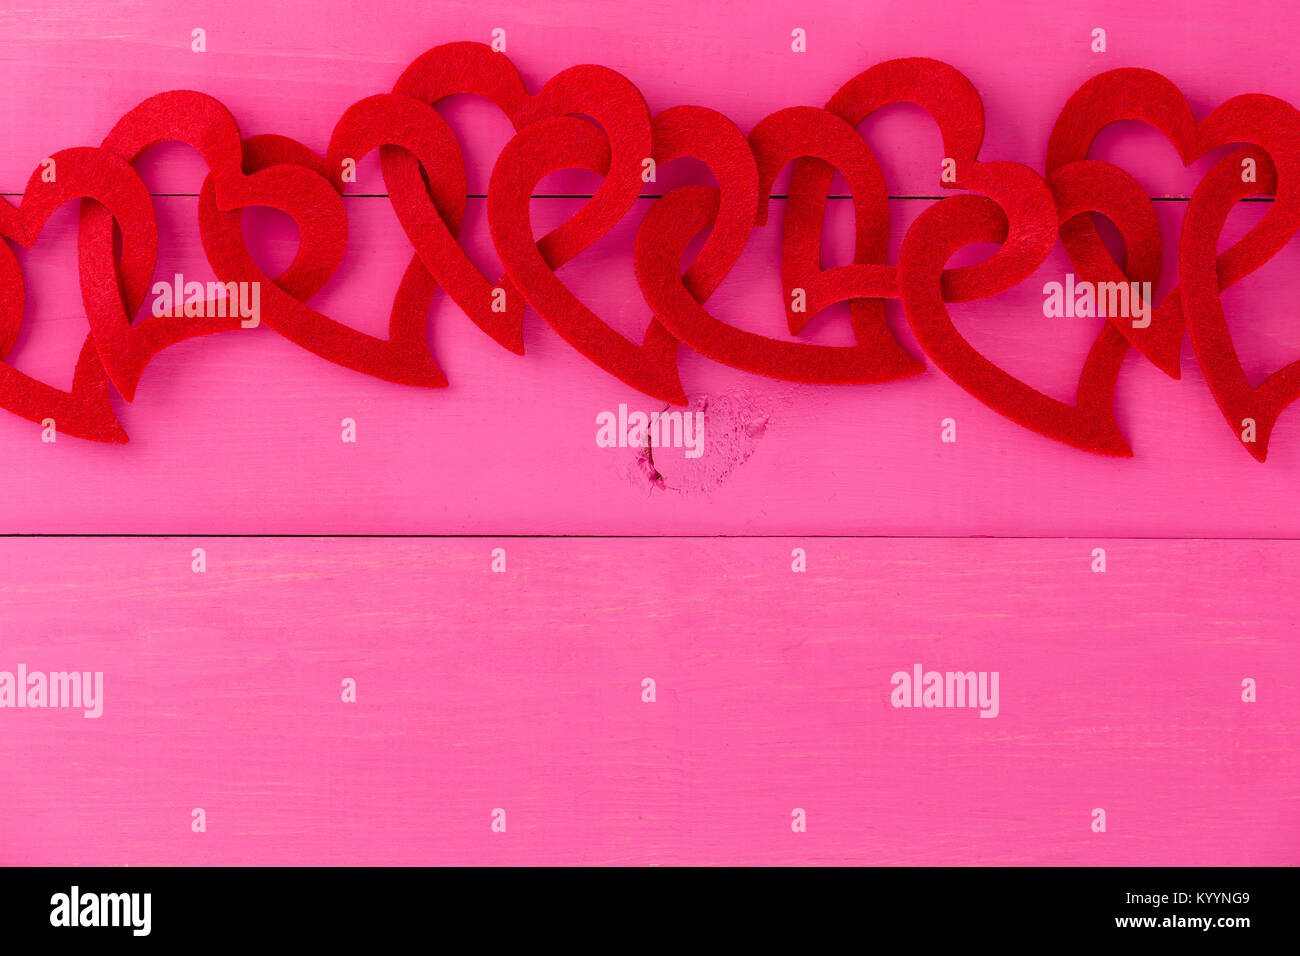 Red heart border for romance and love over a shocking pink background with copy space for your Valentines, wedding or anniversary greeting Stock Photo